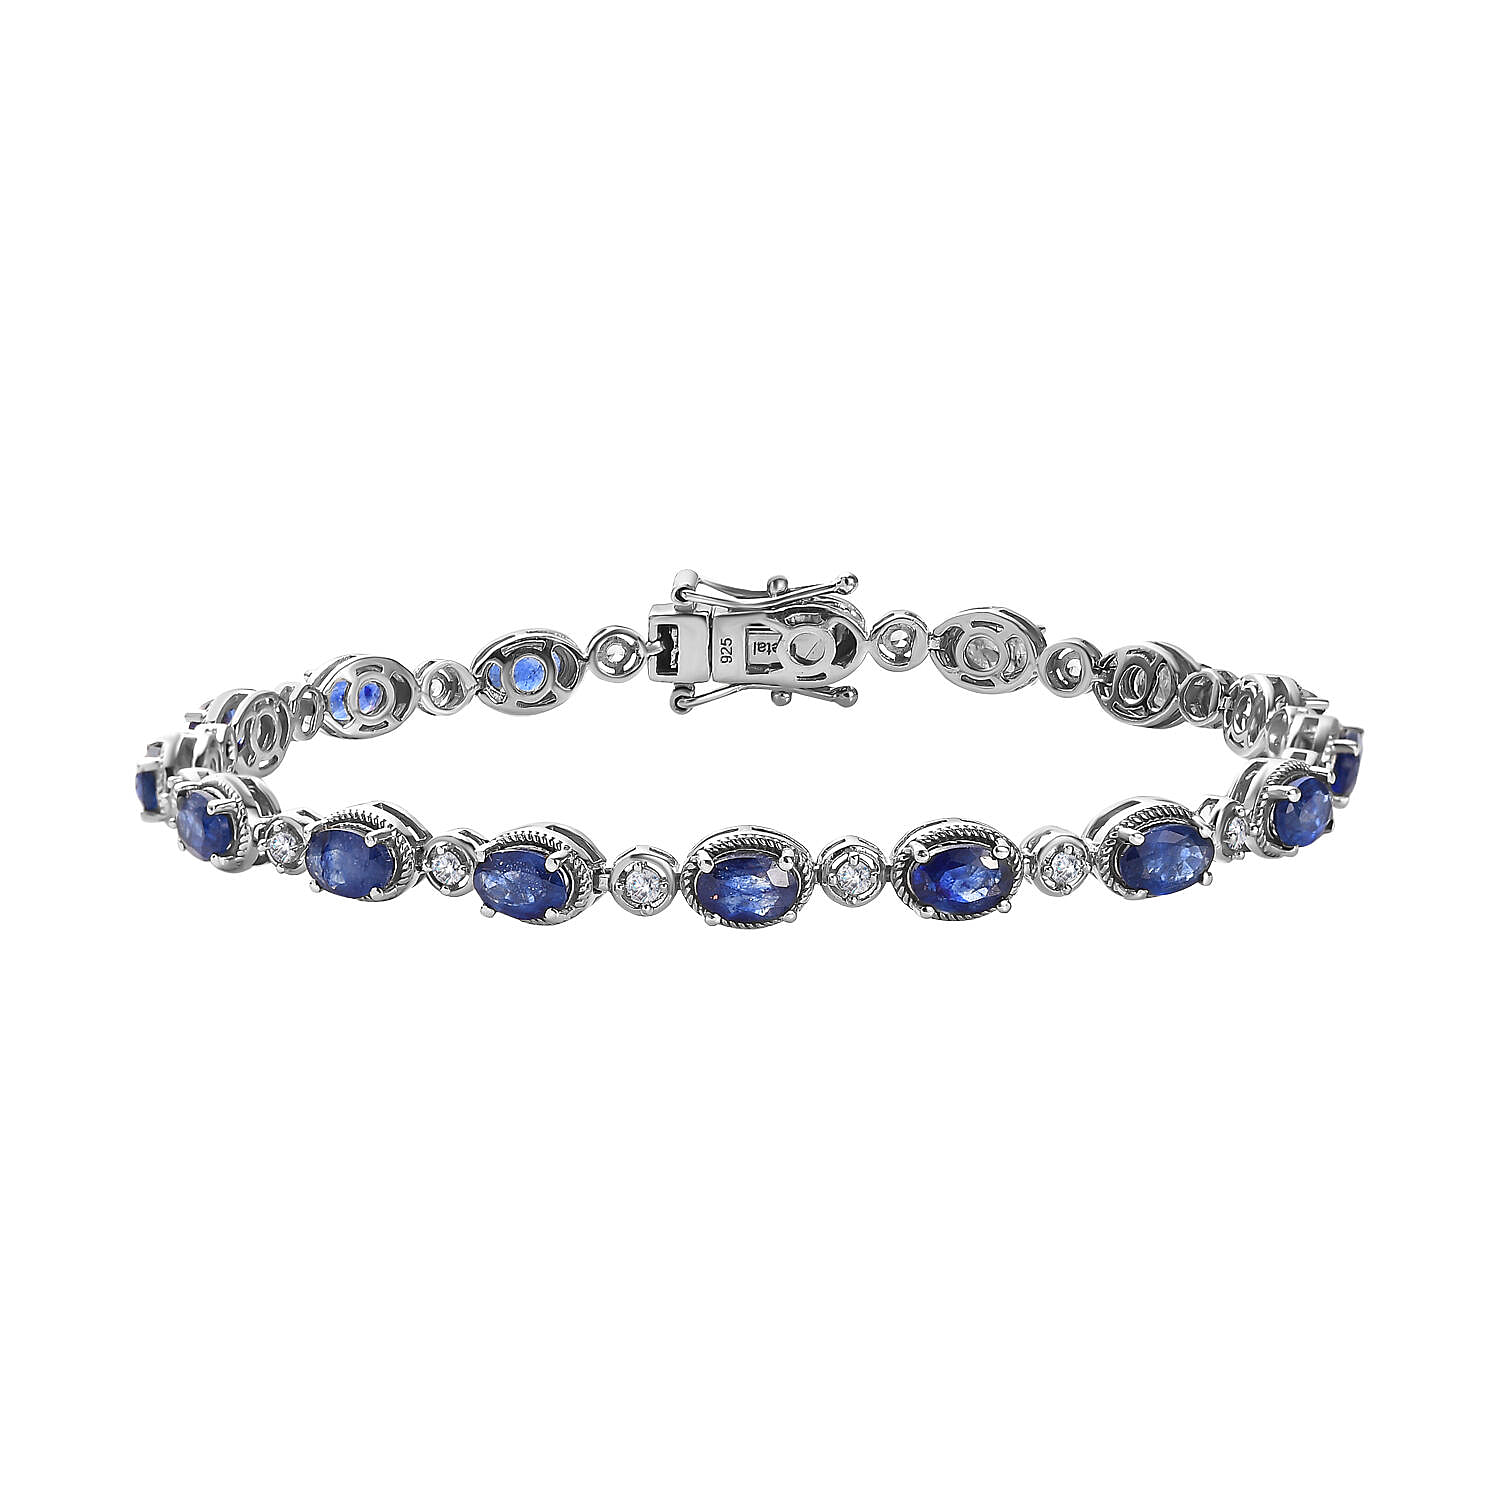 Masoala Sapphire and Natural Zircon Tennis Bracelet (Size - 8) in Platinum Overlay Sterling Silver 10.51 Ct, Silver Wt. 11.30 Gms